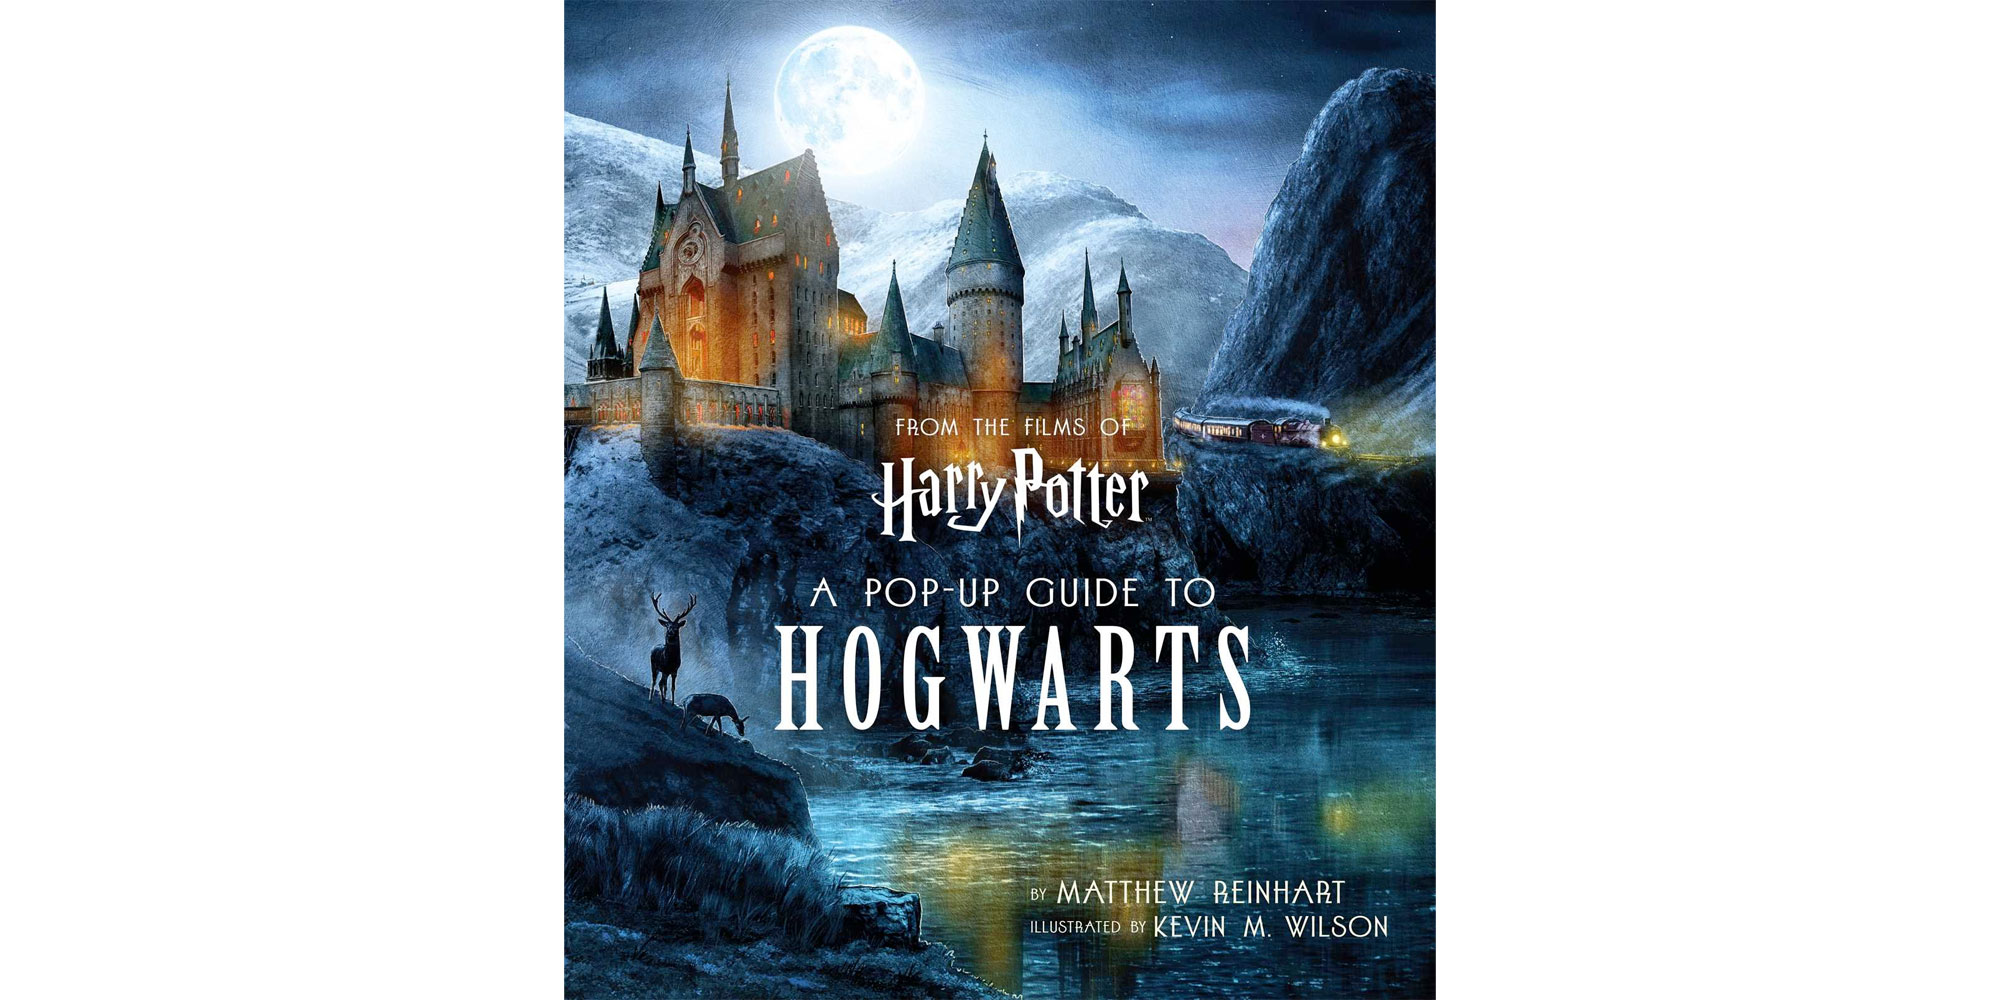 Enjoy Harry Potter: A Pop-Up Guide to Hogwarts at $27.50, an